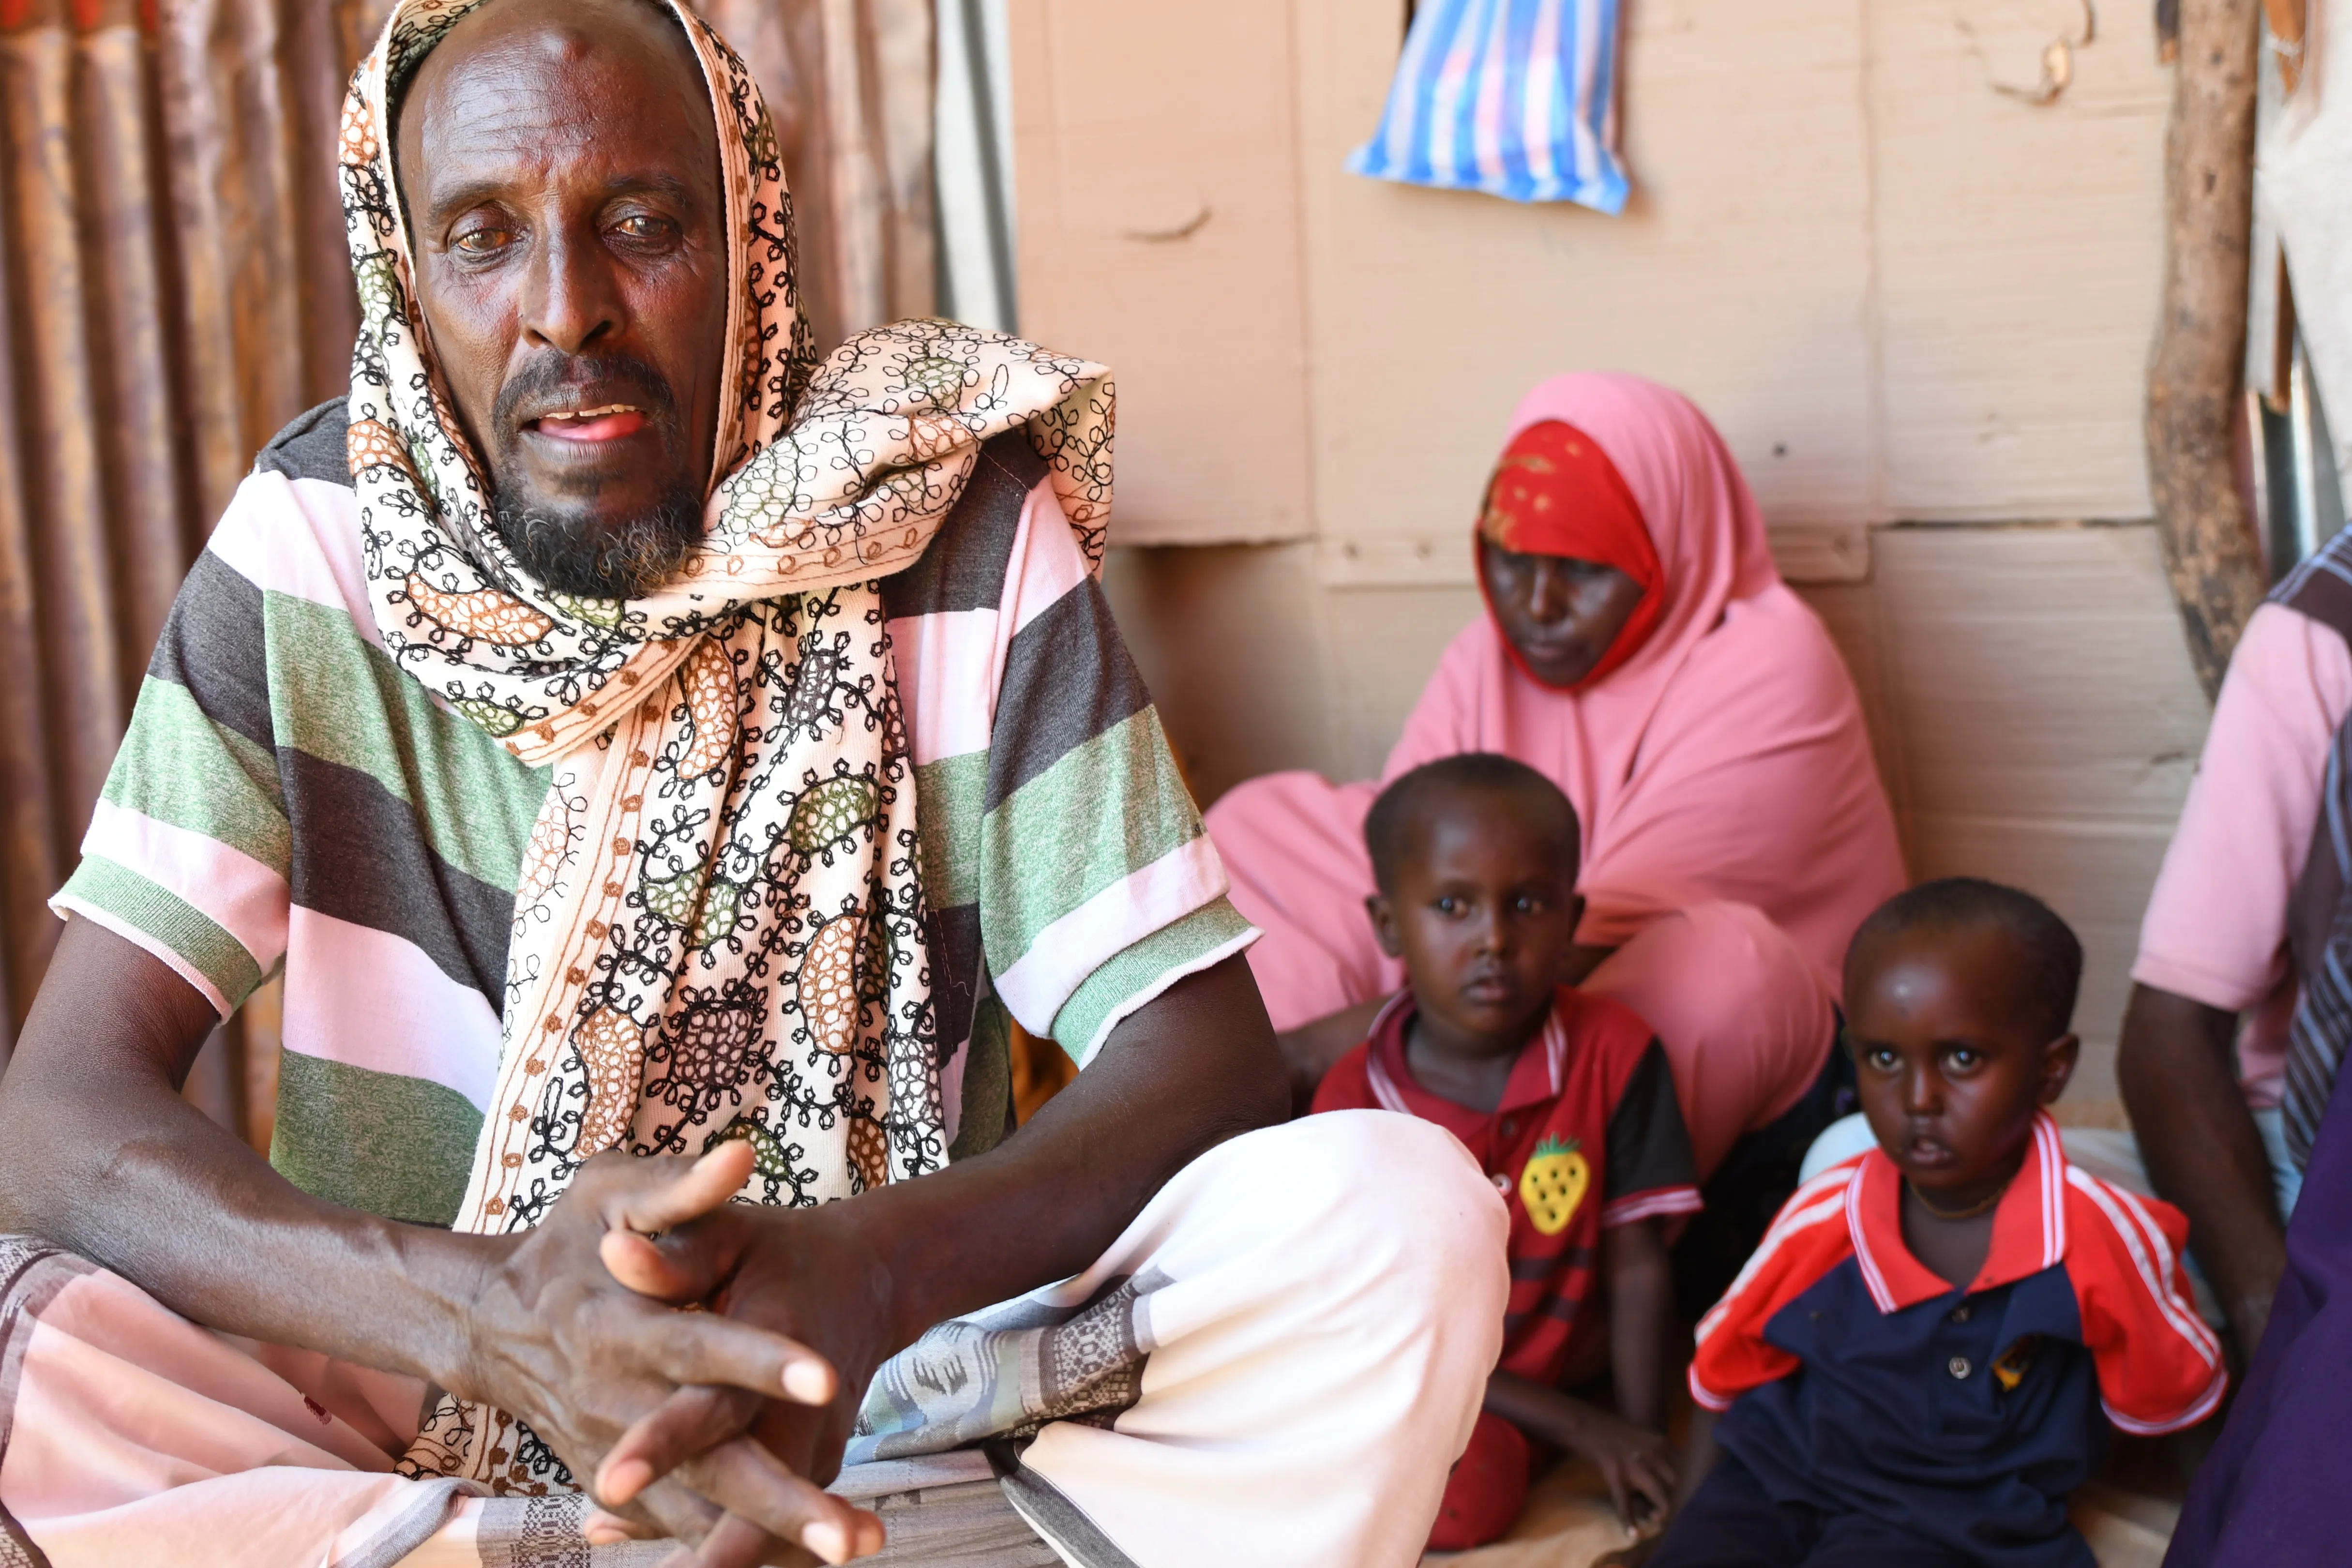 We Need Your Support Now - Help Adam Hussein and His Family in Somalia